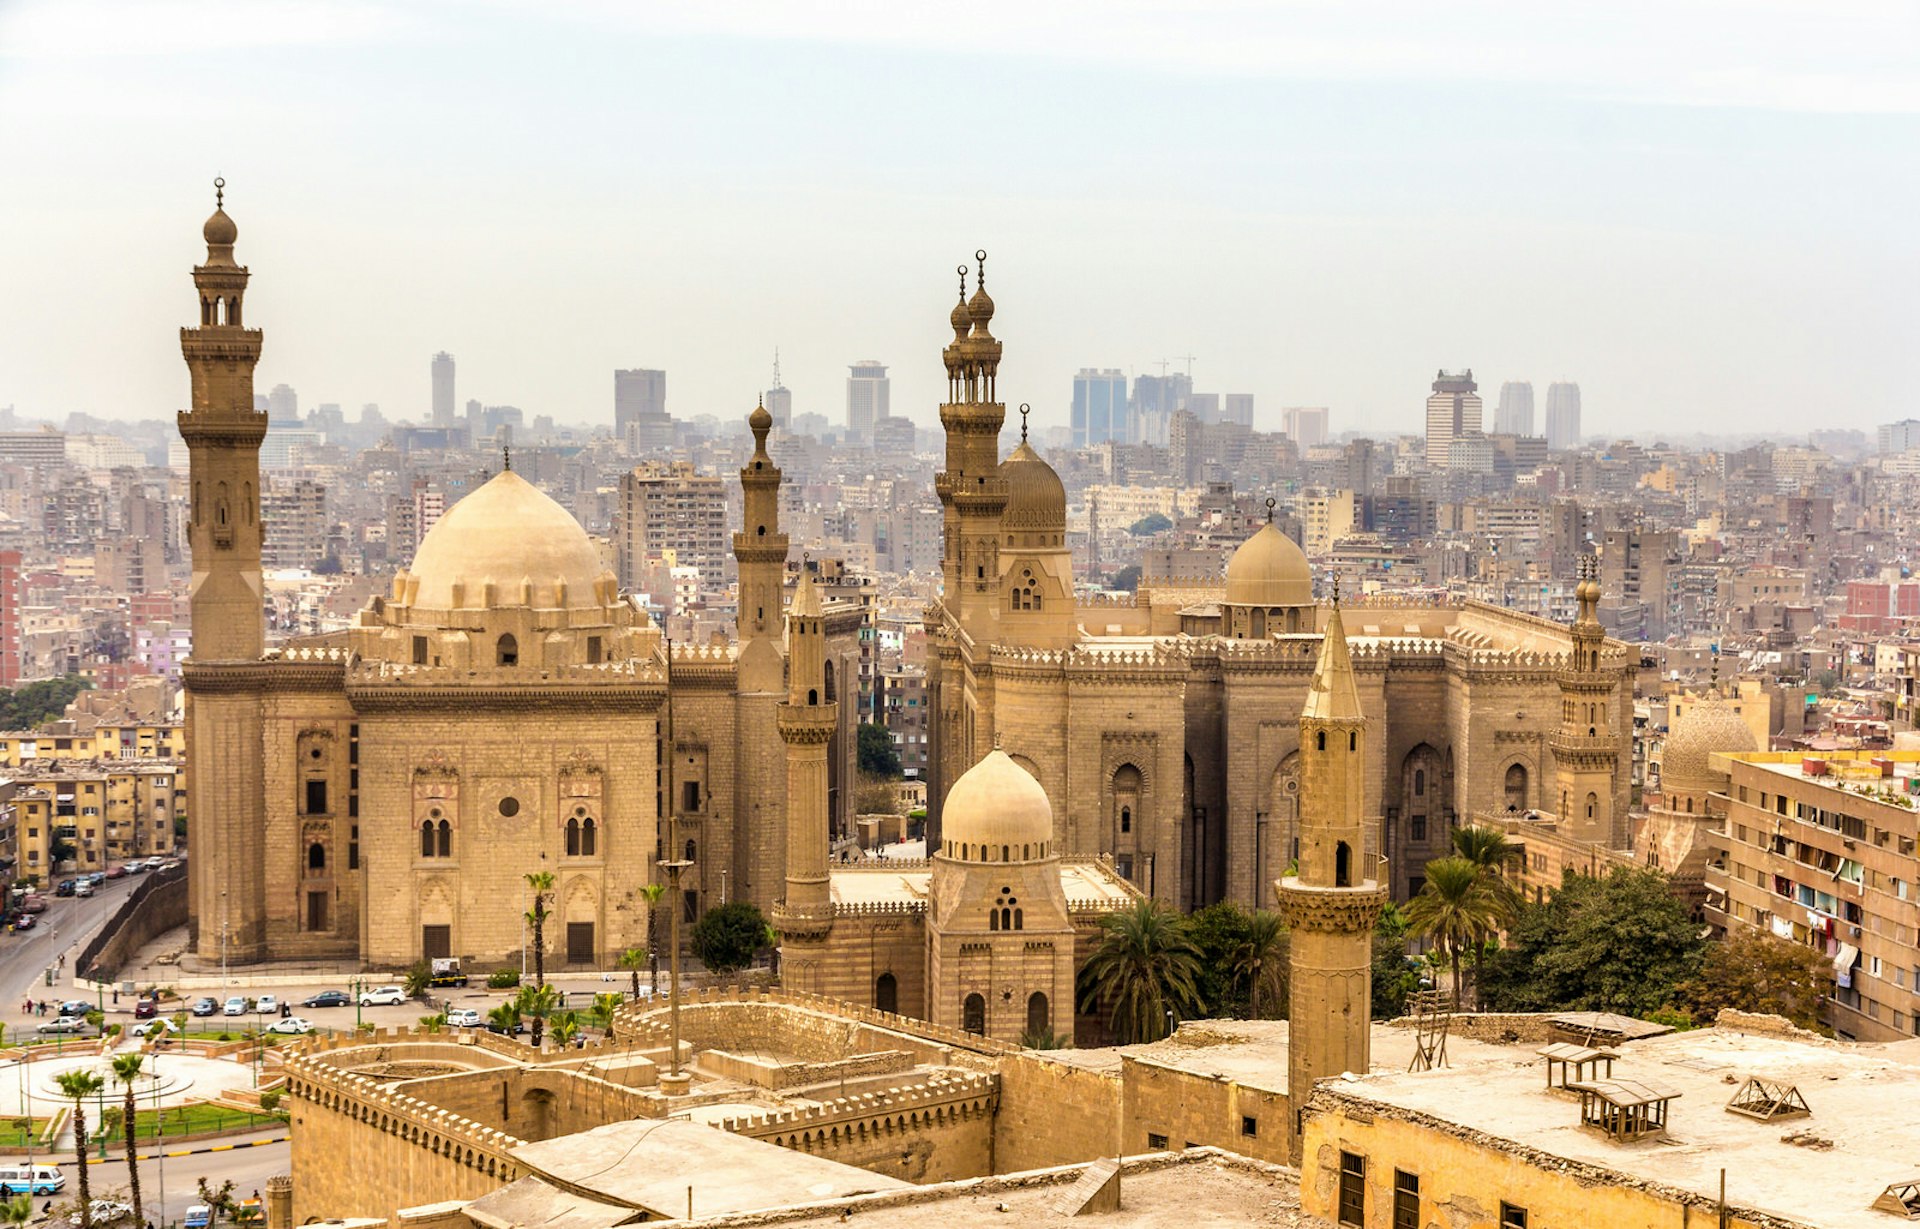 View of the Mosques of Sultan Hassan and Al Rifai in Cairo, Egypt. Image by Leonid Andronov / Shutterstock